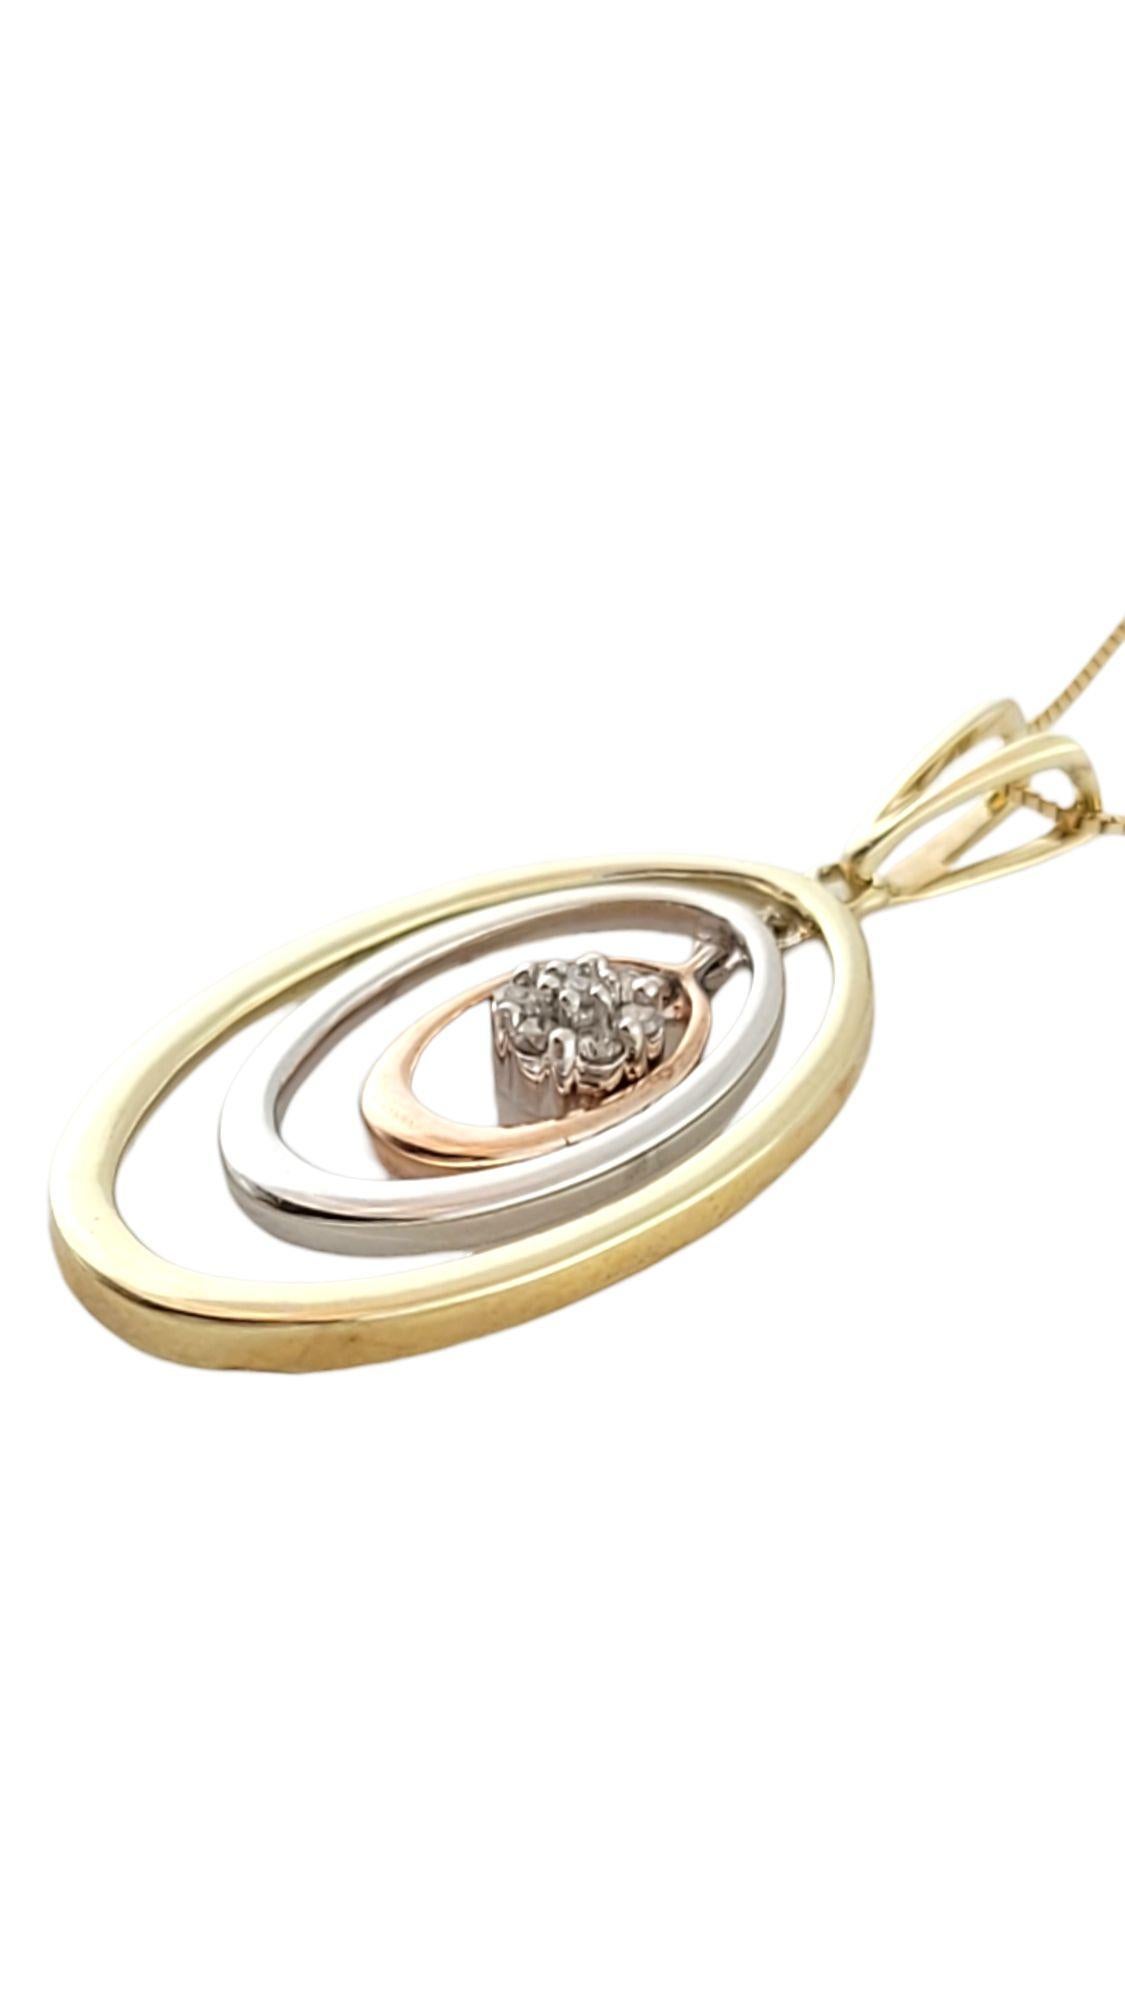 Brilliant Cut 10K Yellow, White and Rose Gold Oval Diamond Pendant Chain #14560 For Sale